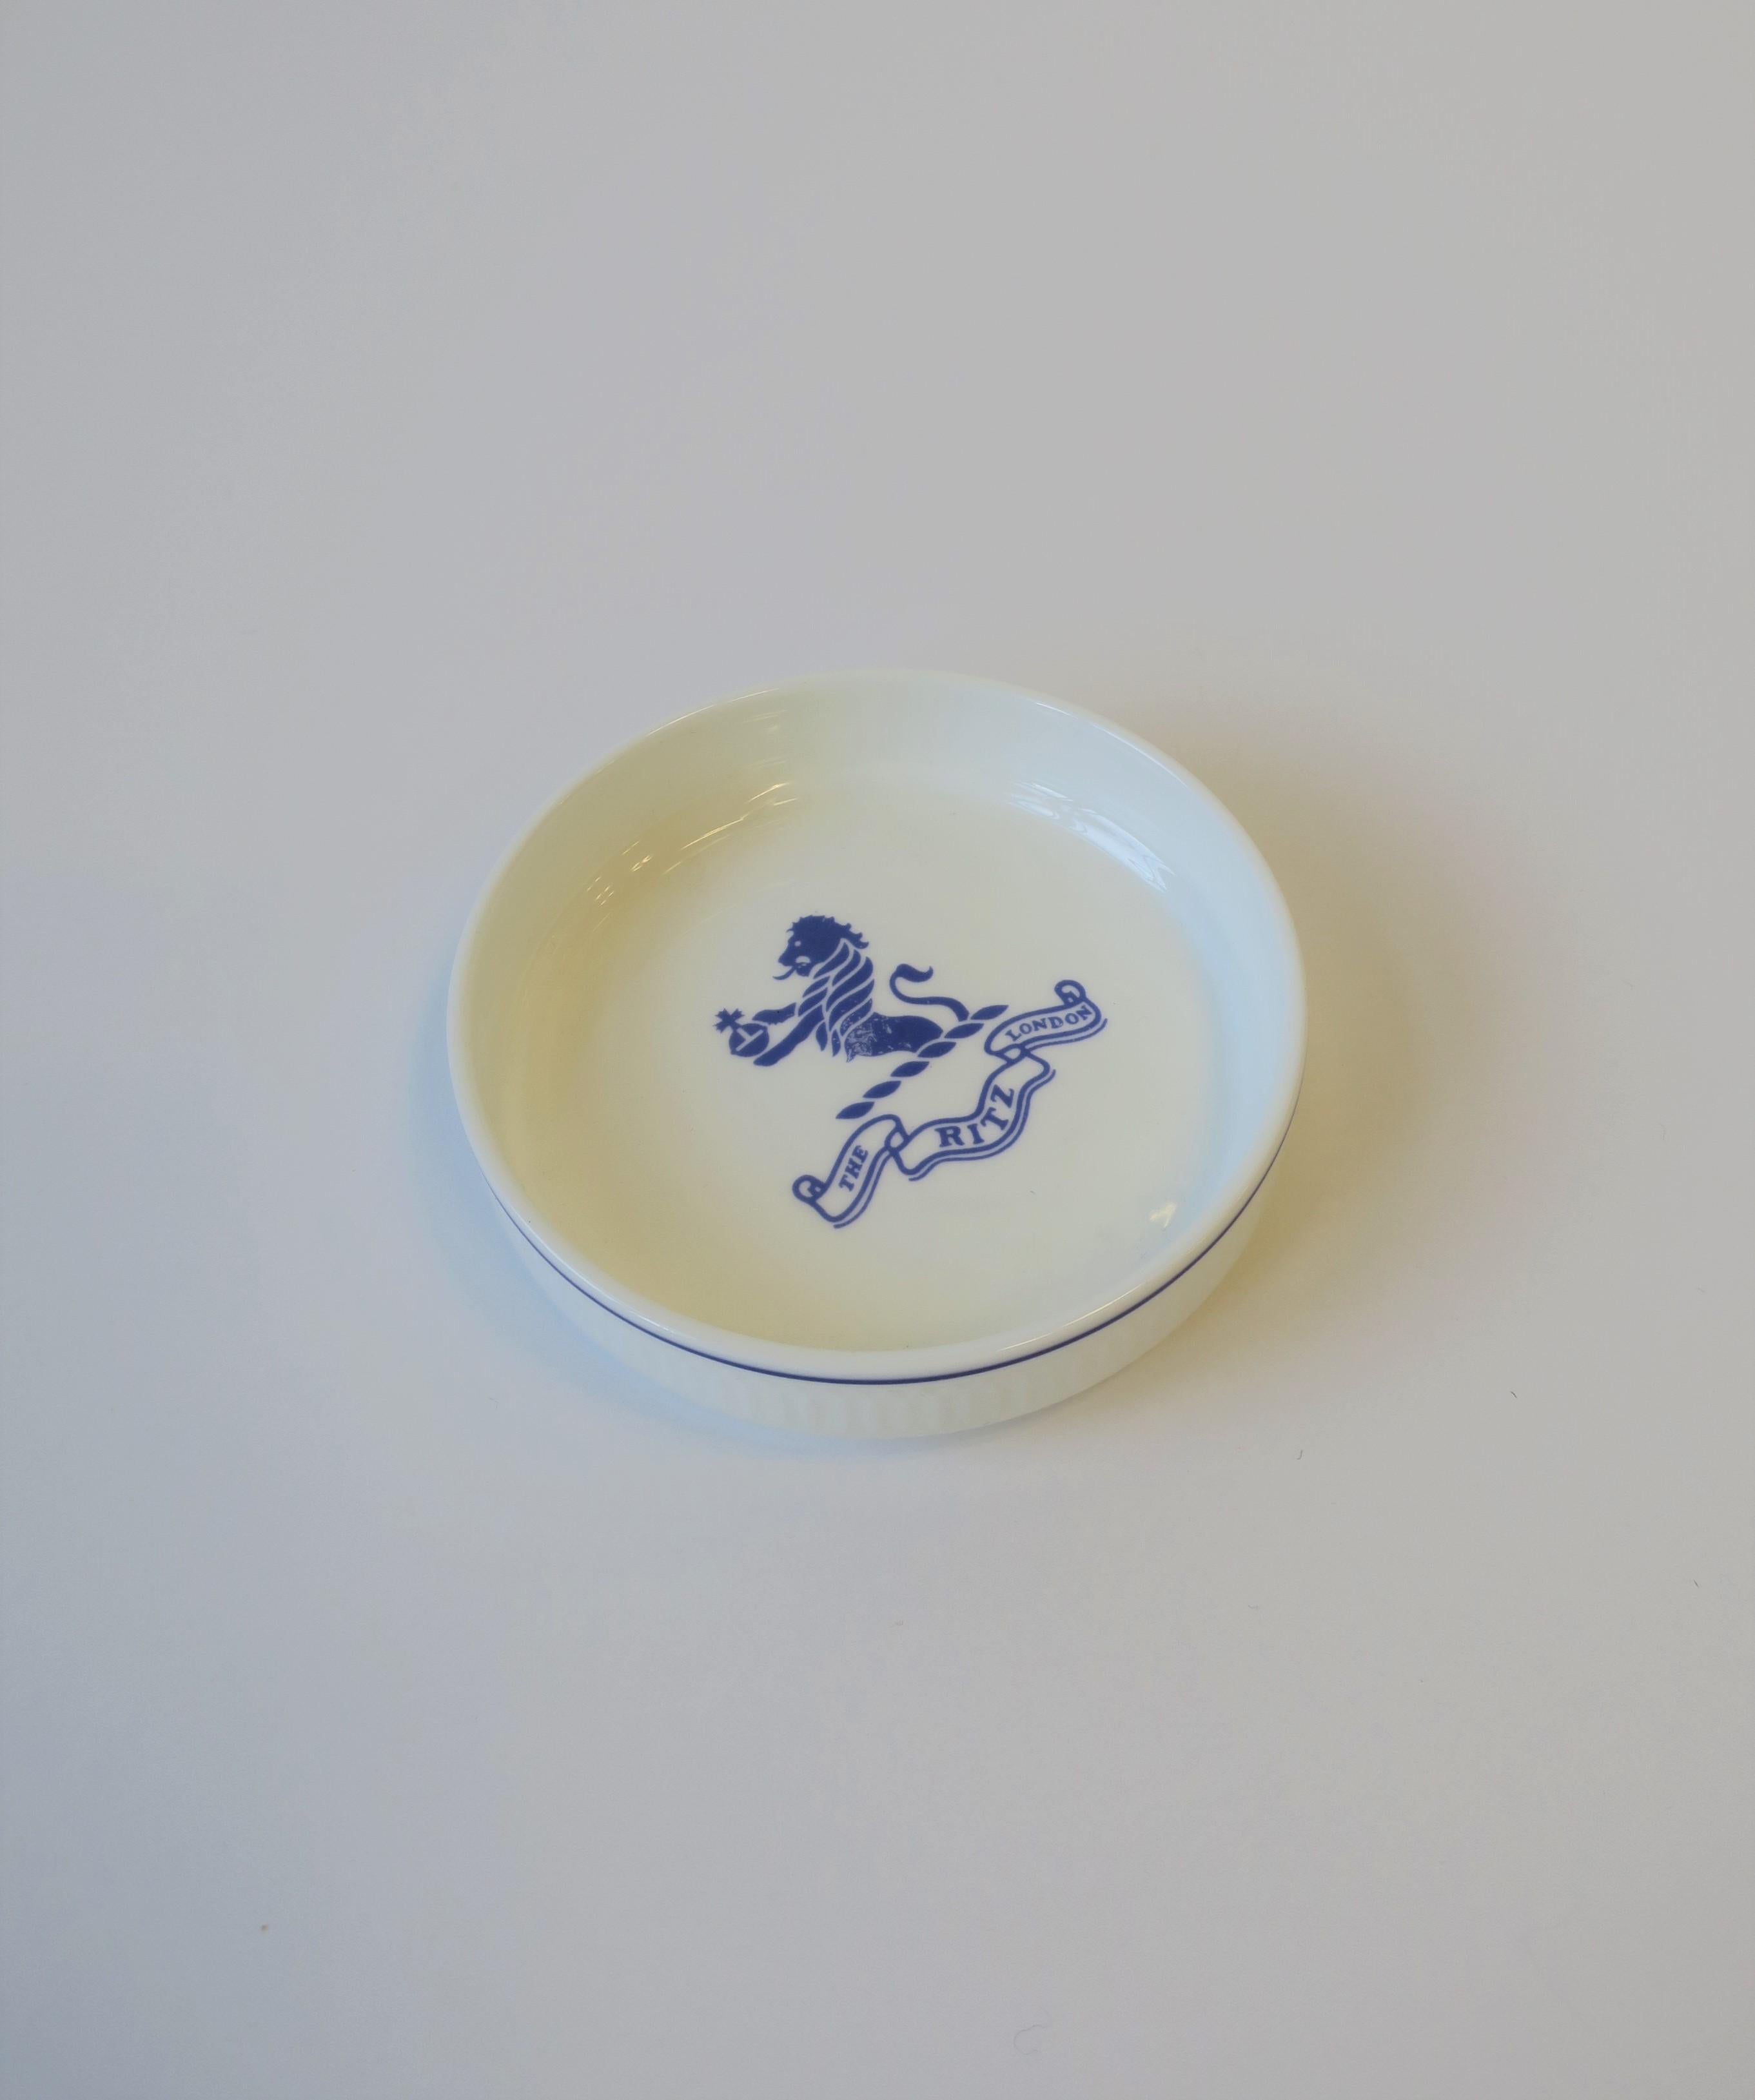 The Ritz Hotel London Blue and White Porcelain Jewelry Dish by Royal Doulton 3